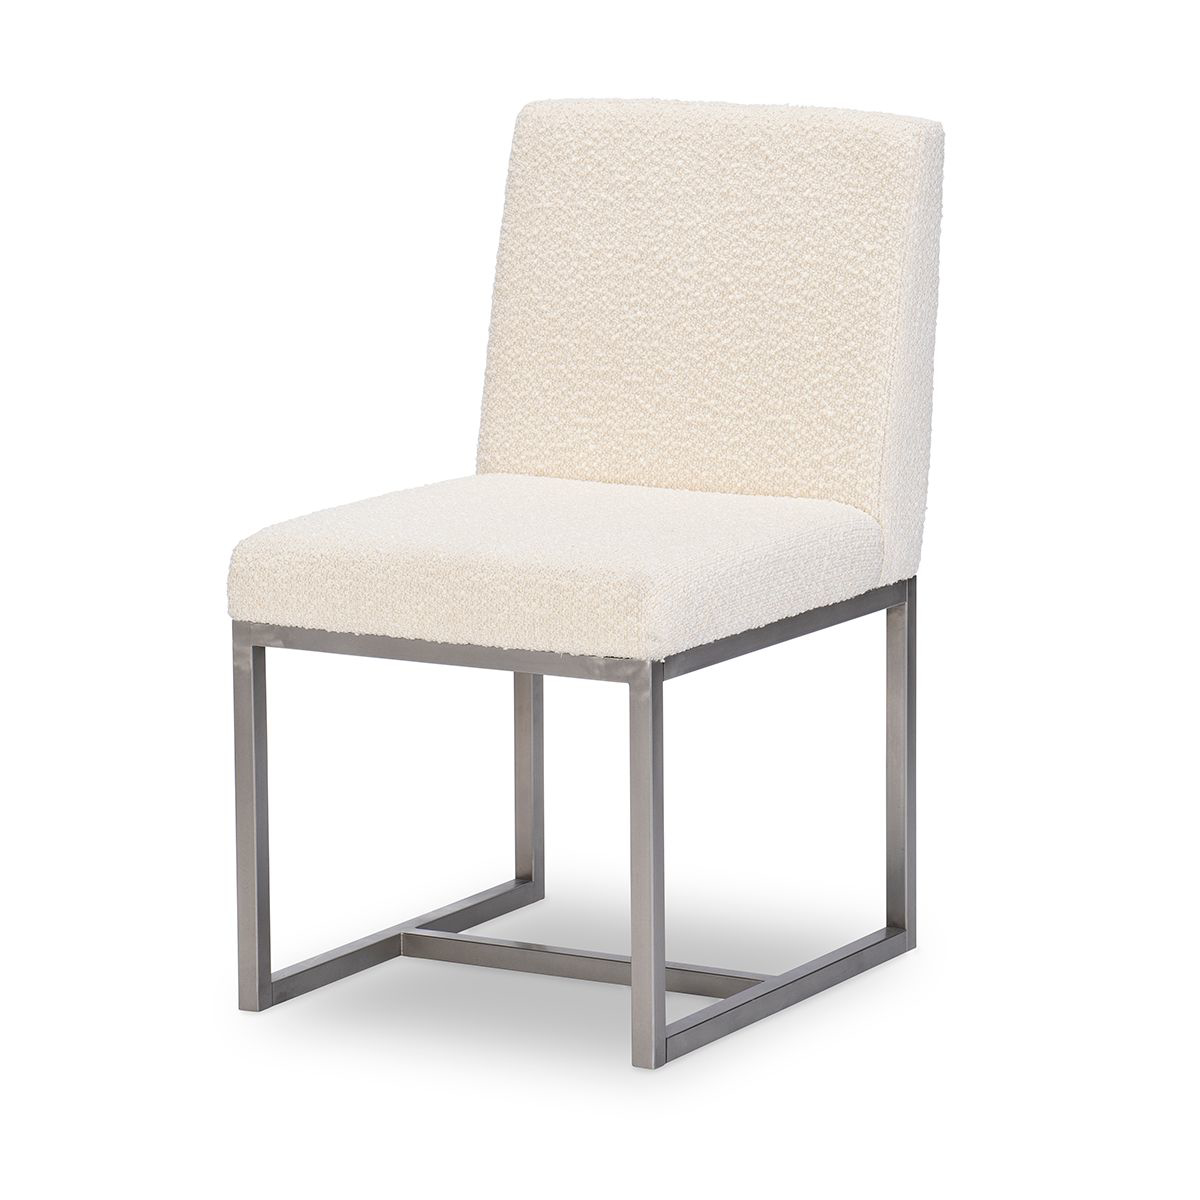 Picture of BISCAYNE UPH SIDE CHAIR